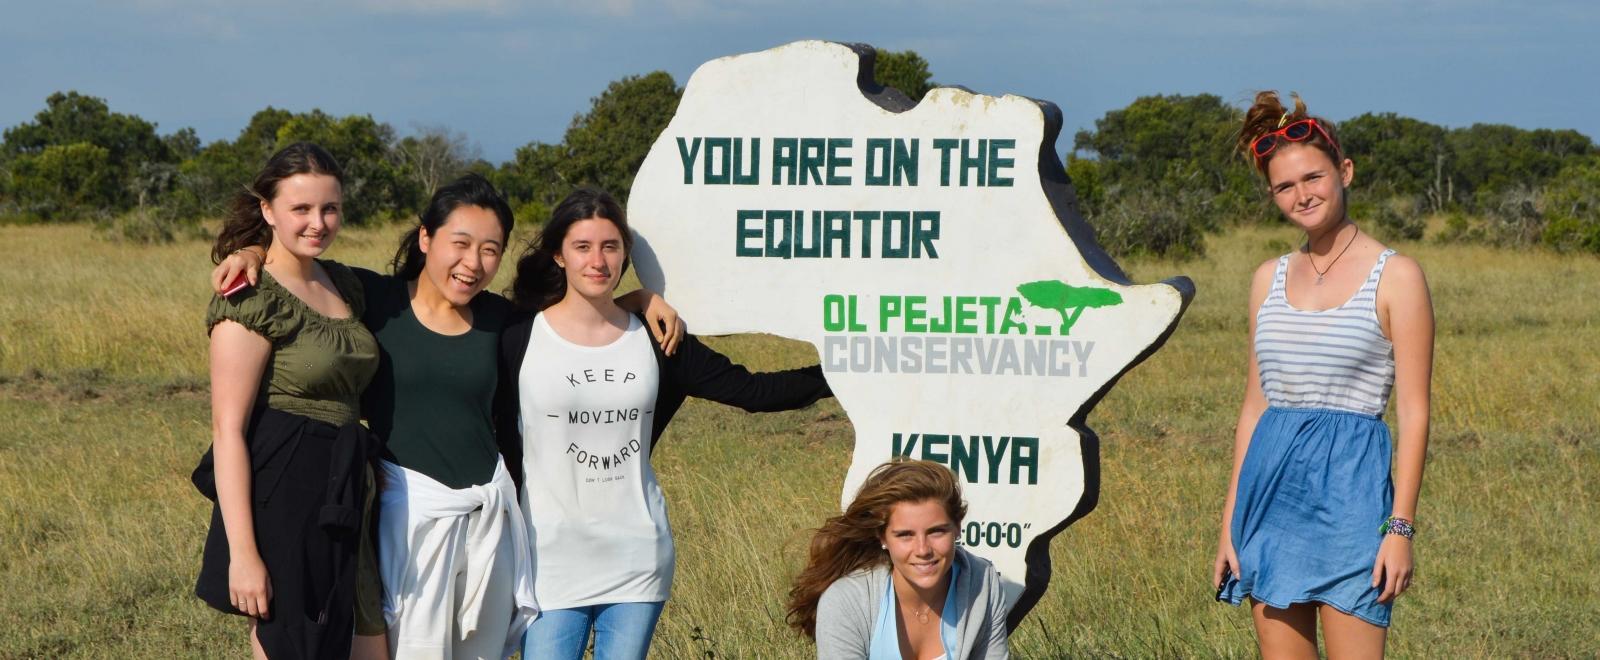 Projects Abroad staff take the volunteers on a tour of Kenya.